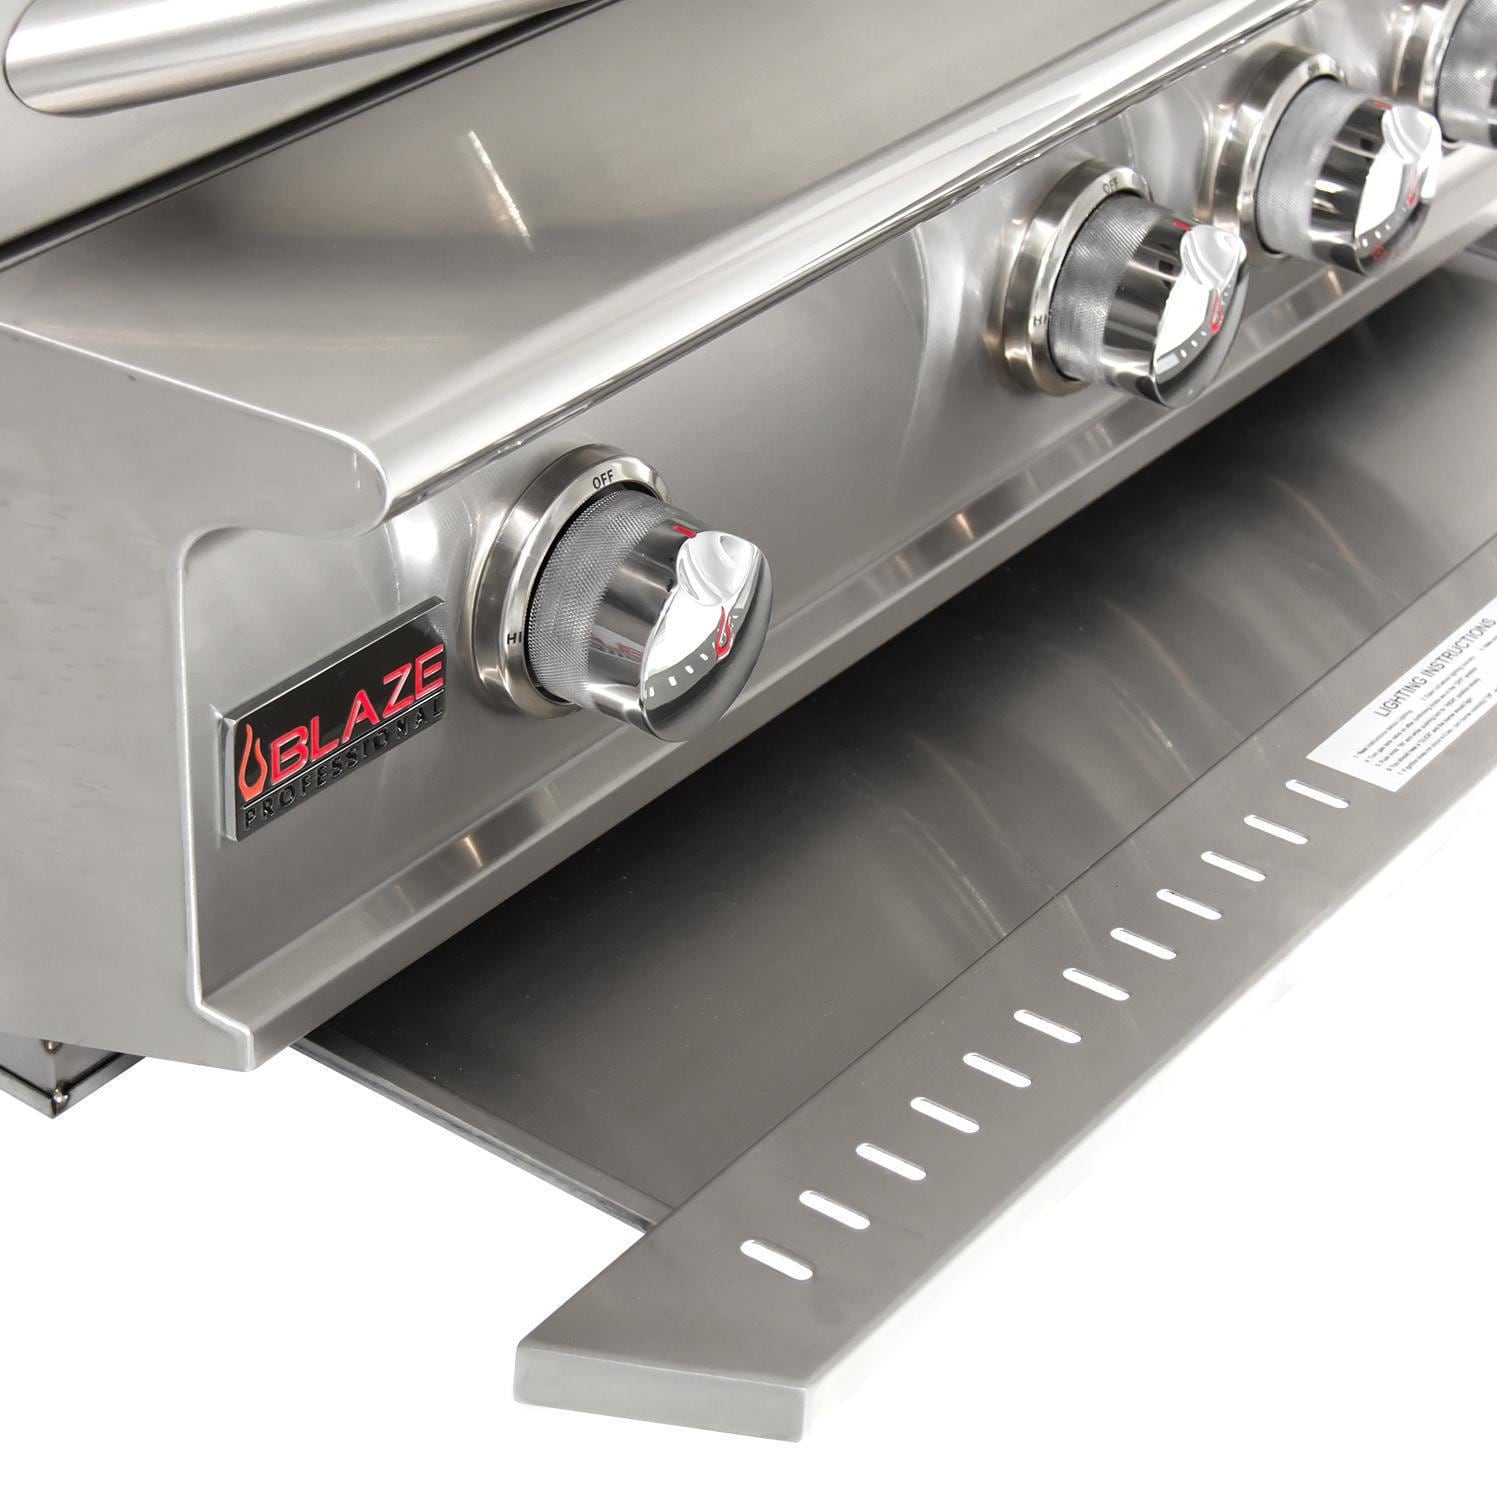 Blaze Professional LUX 44-Inch 4-Burner Built-In Natural Gas Grill With Rear Infrared Burner - BLZ-4PRO-NG/LP